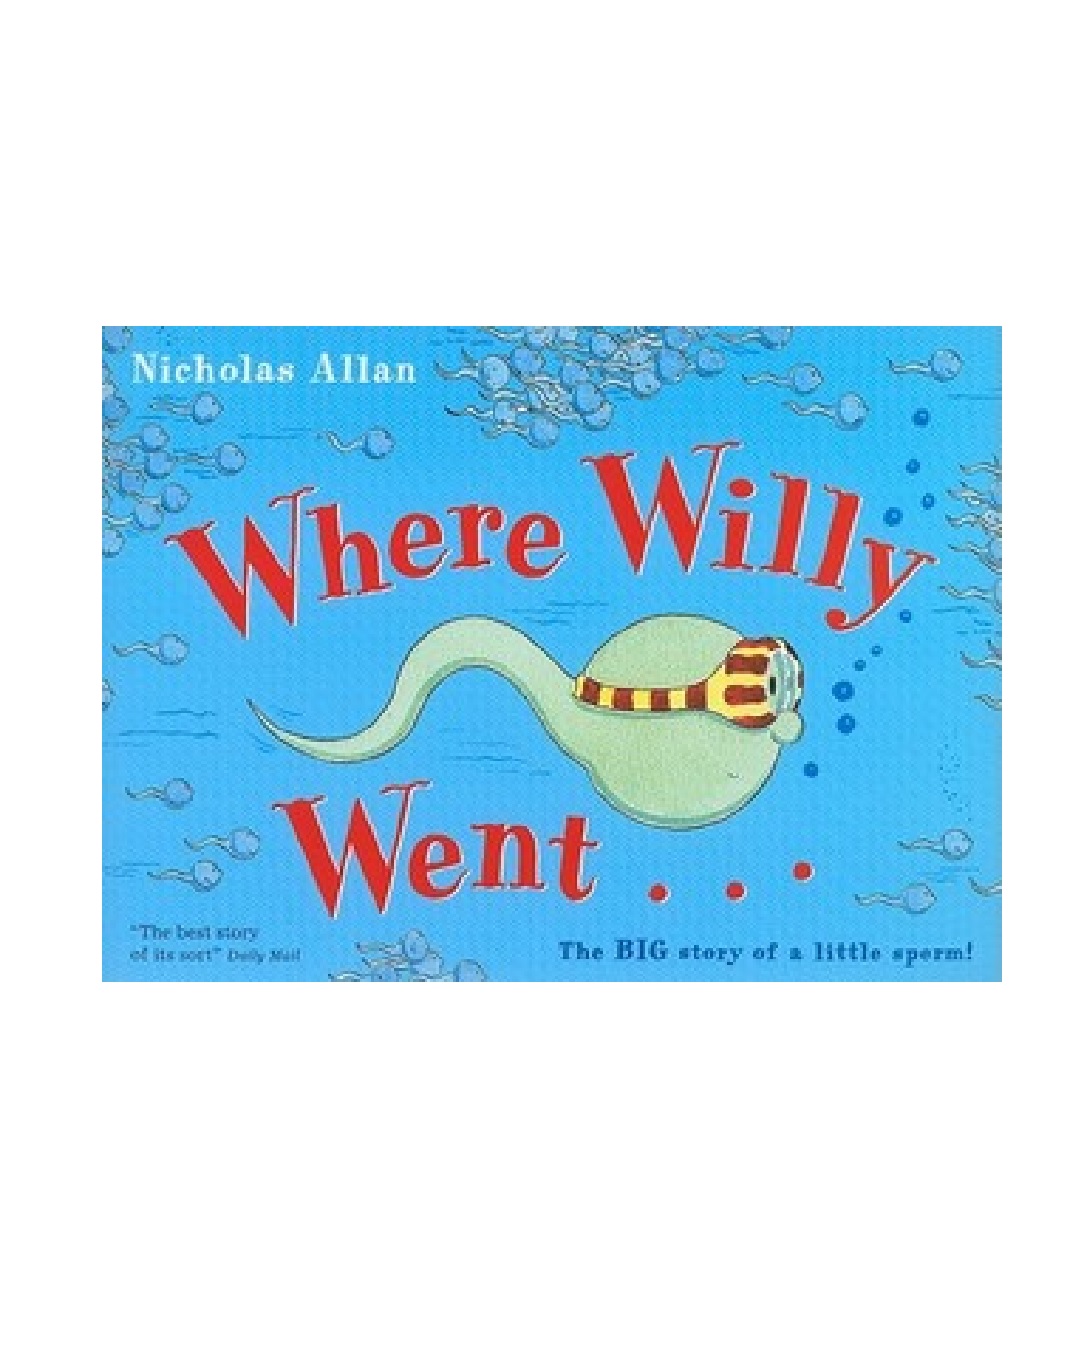 Where willy went